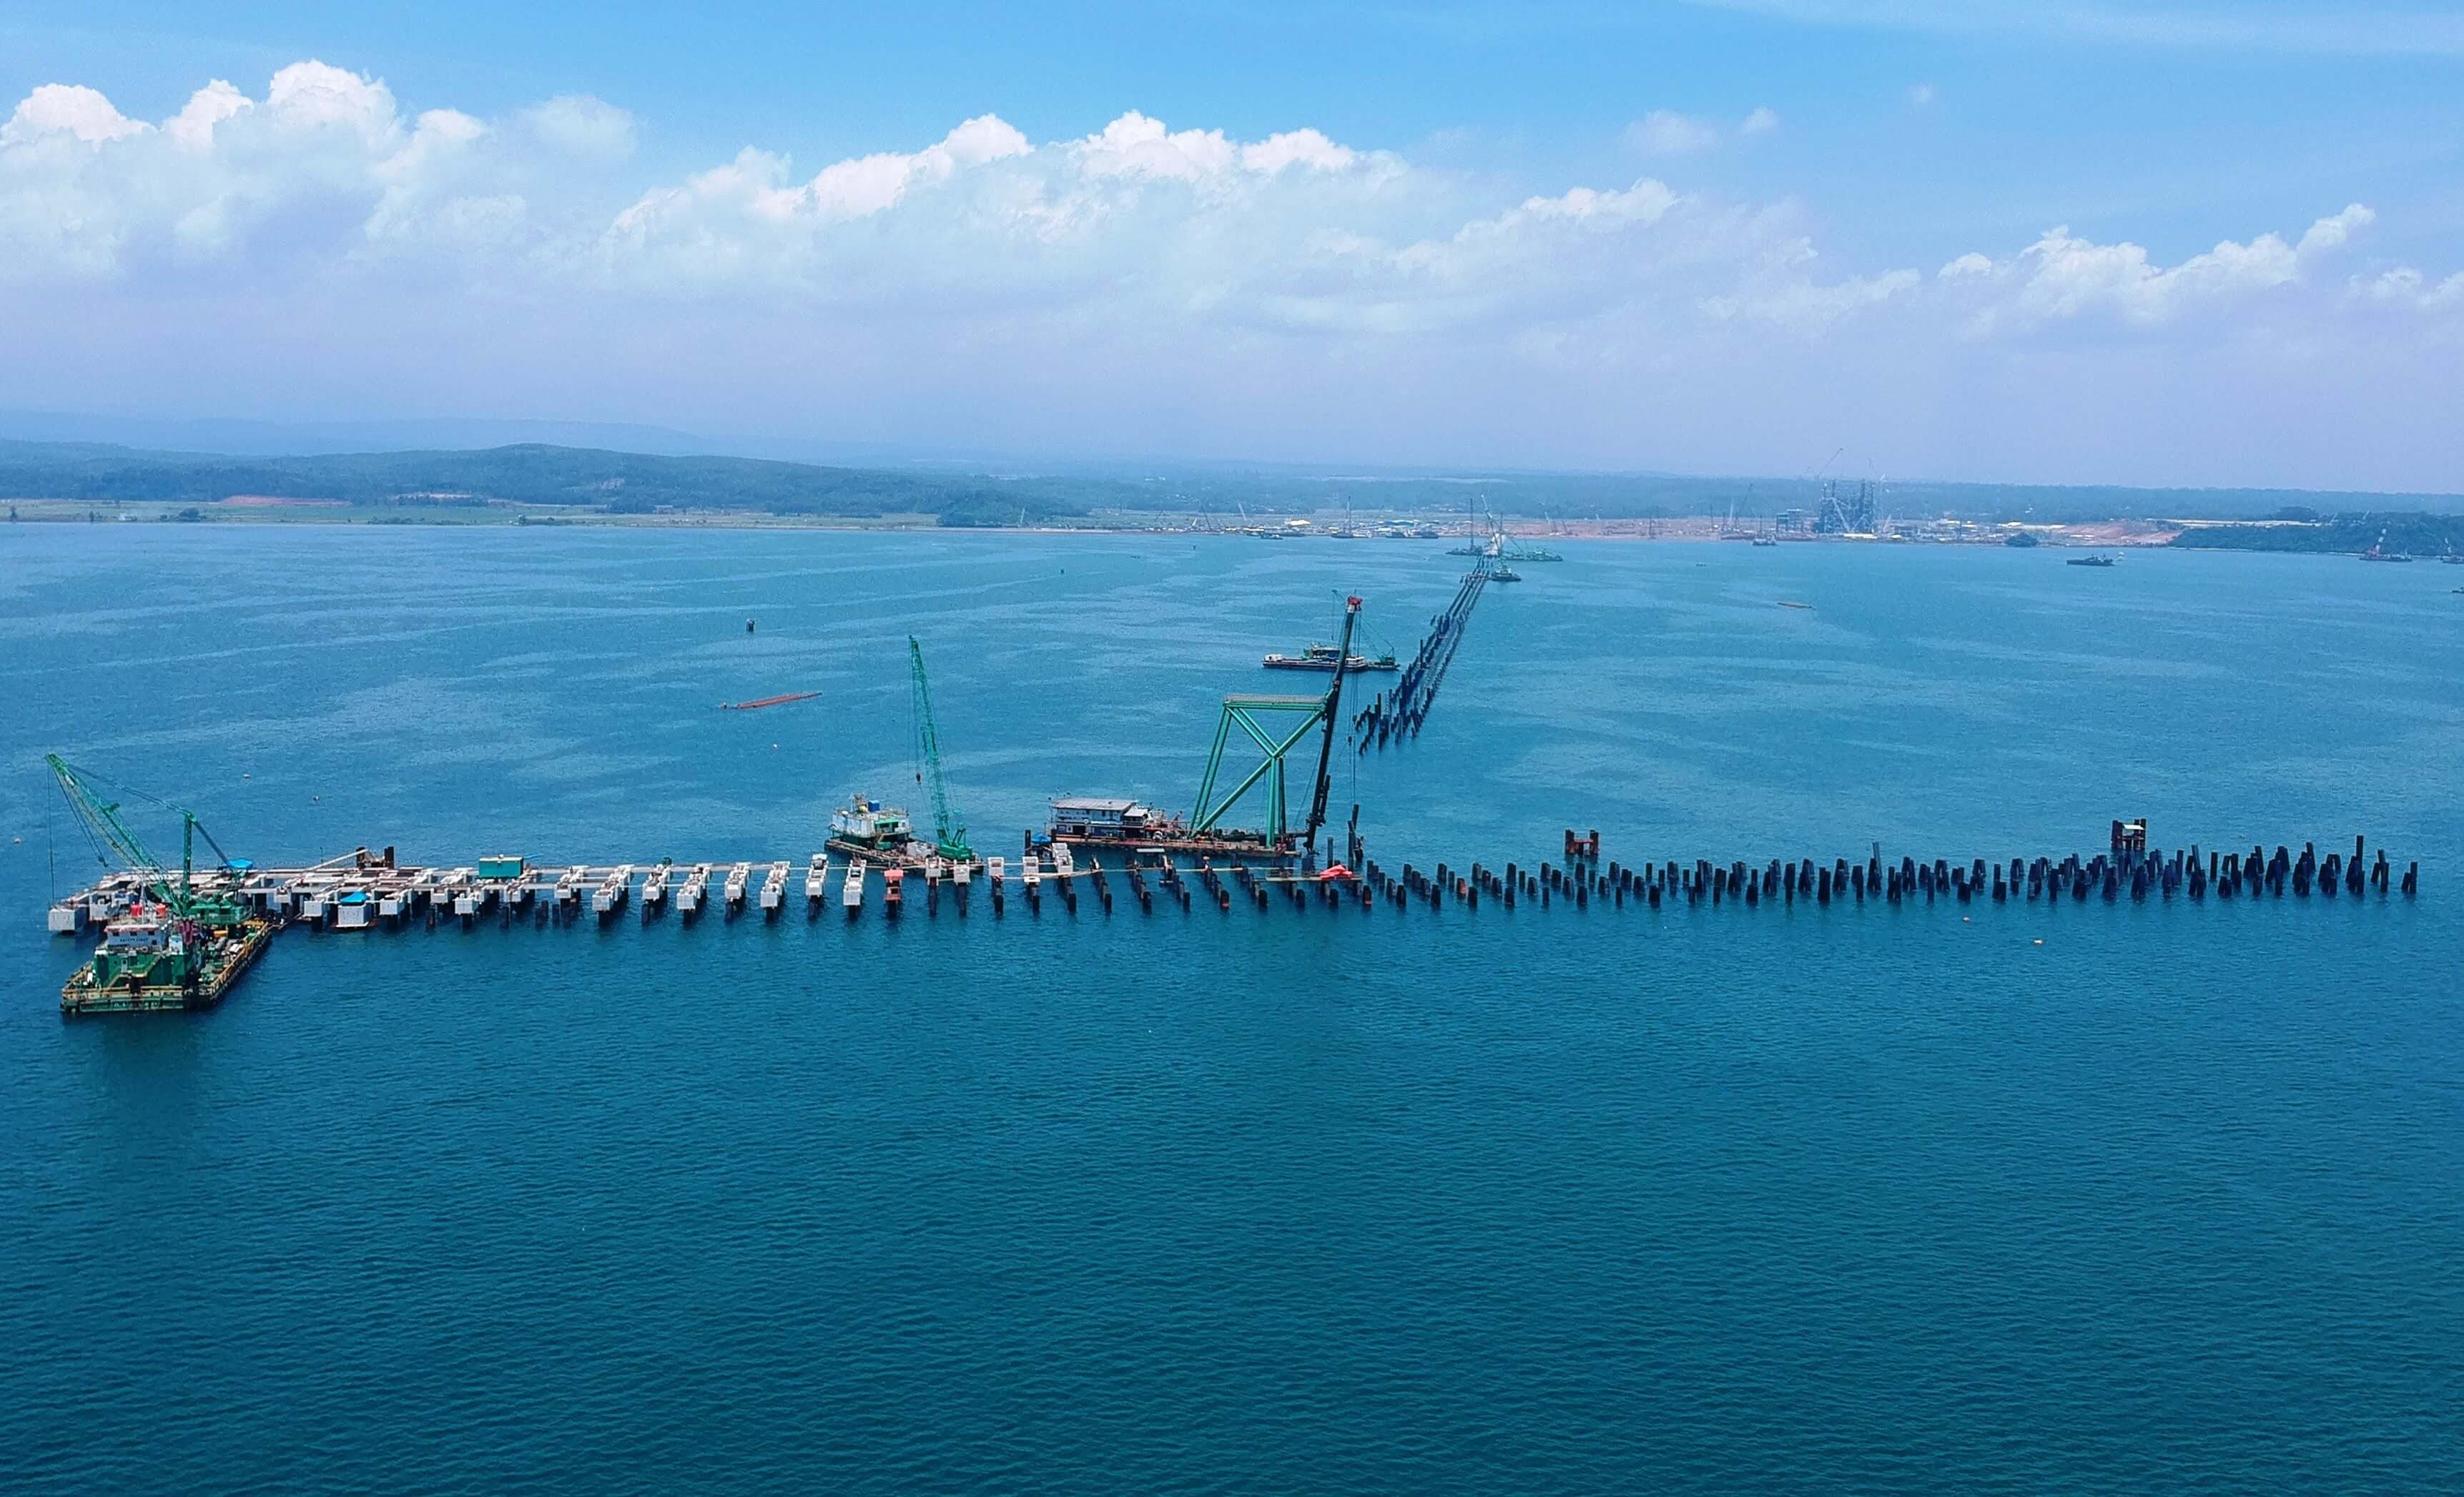 The Jetty One (1) Year Before Completion